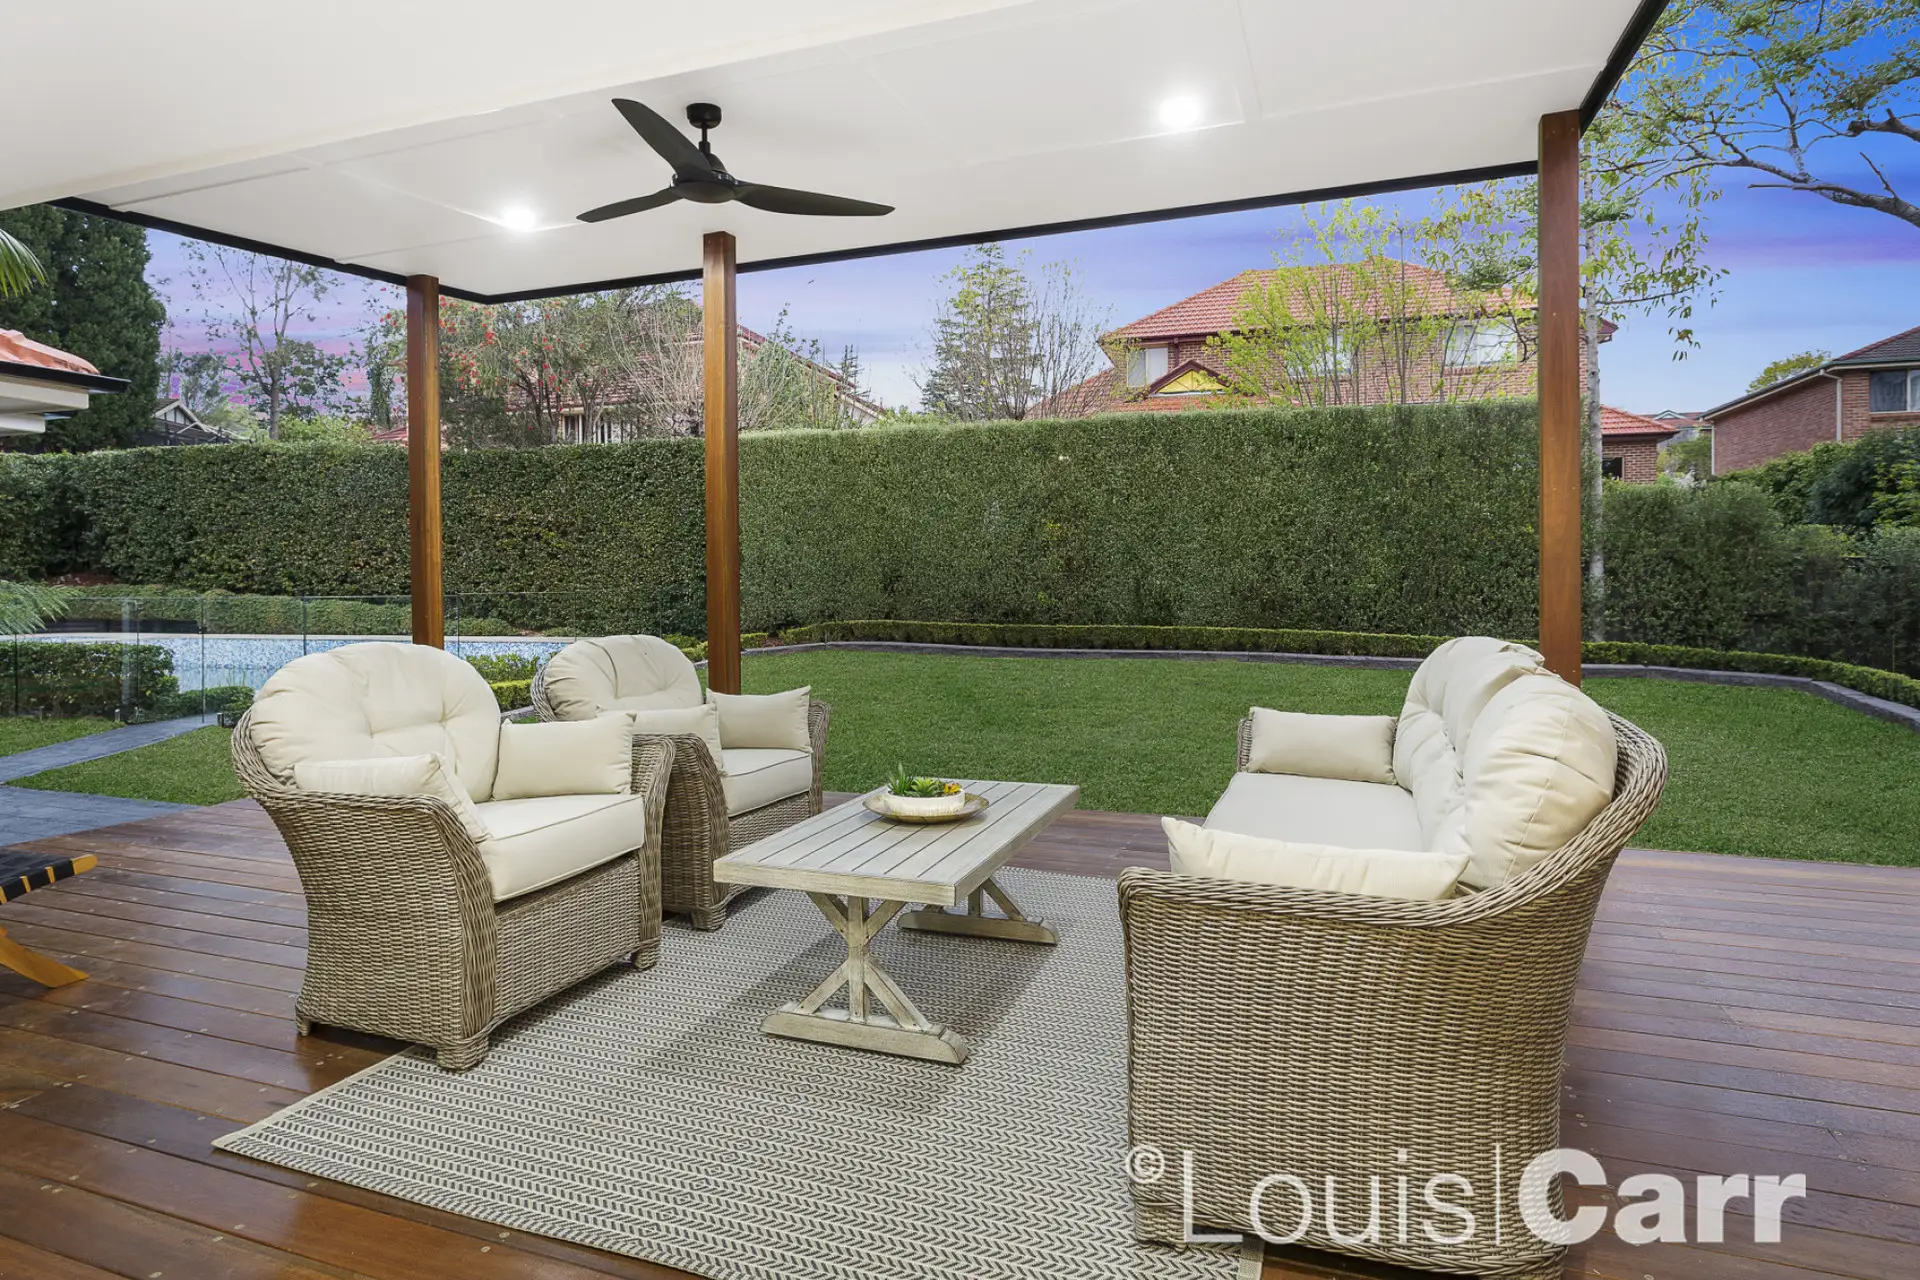 Photo #13: 11 Avonleigh Way, West Pennant Hills - Sold by Louis Carr Real Estate